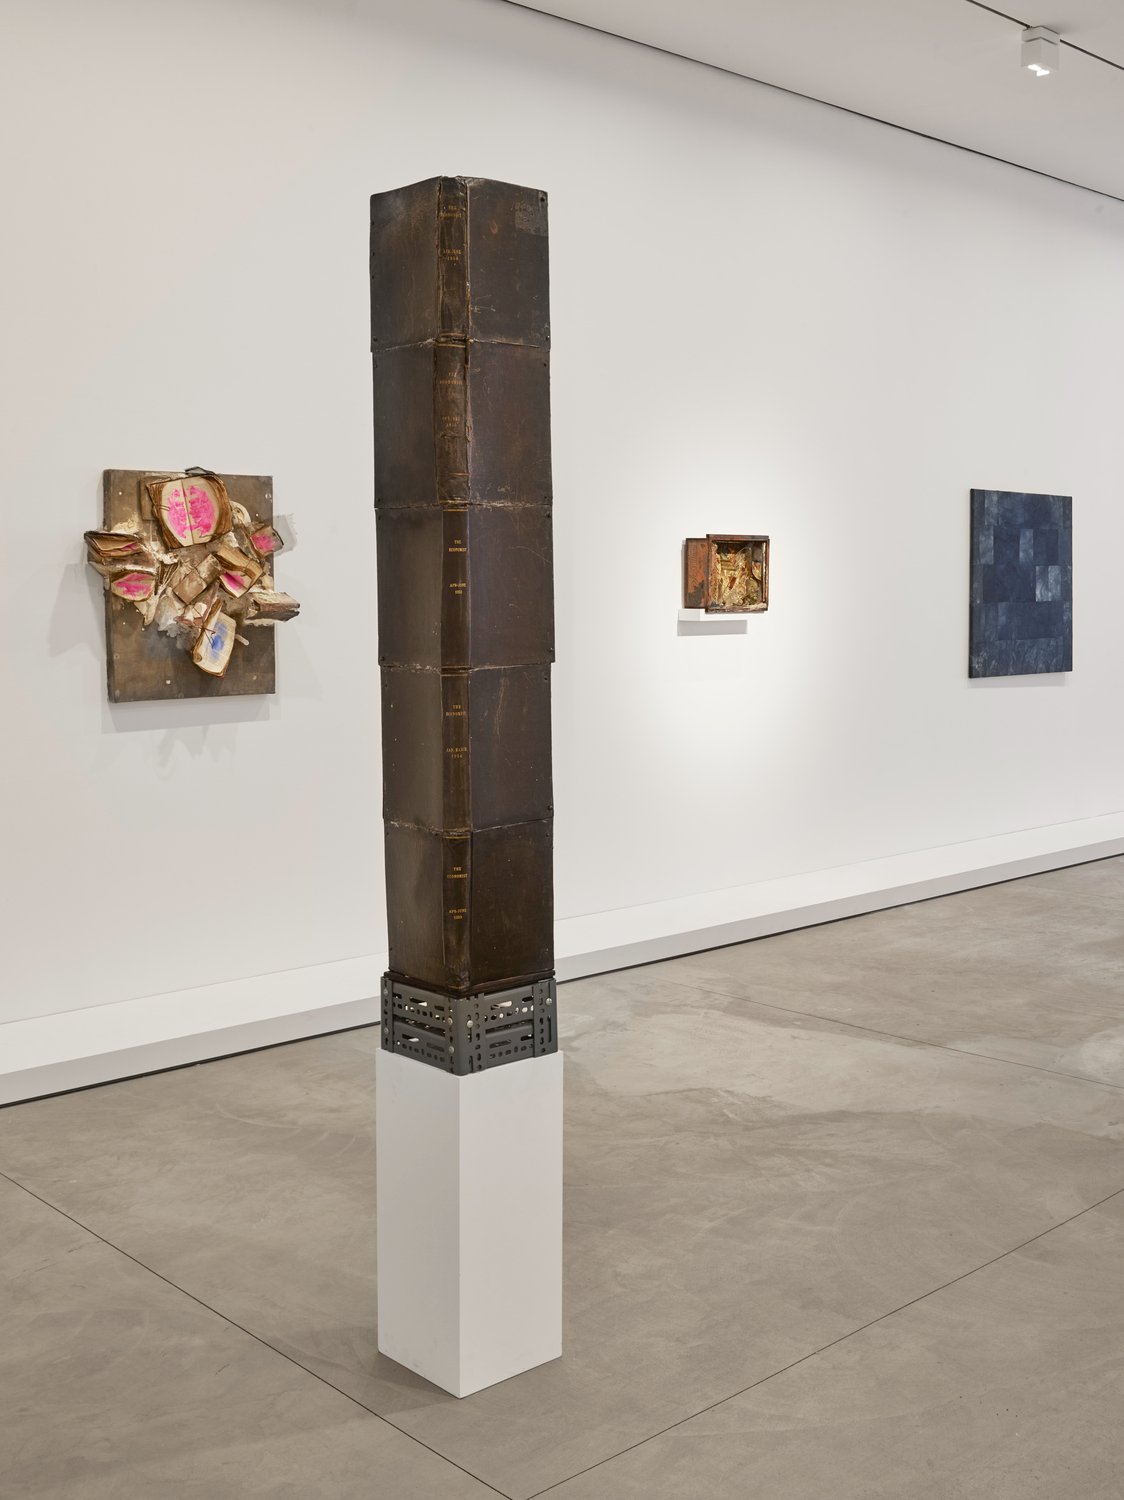 Installation image for Controlled Burnings: Hiller, Latham, Schneemann, at Lisson Gallery